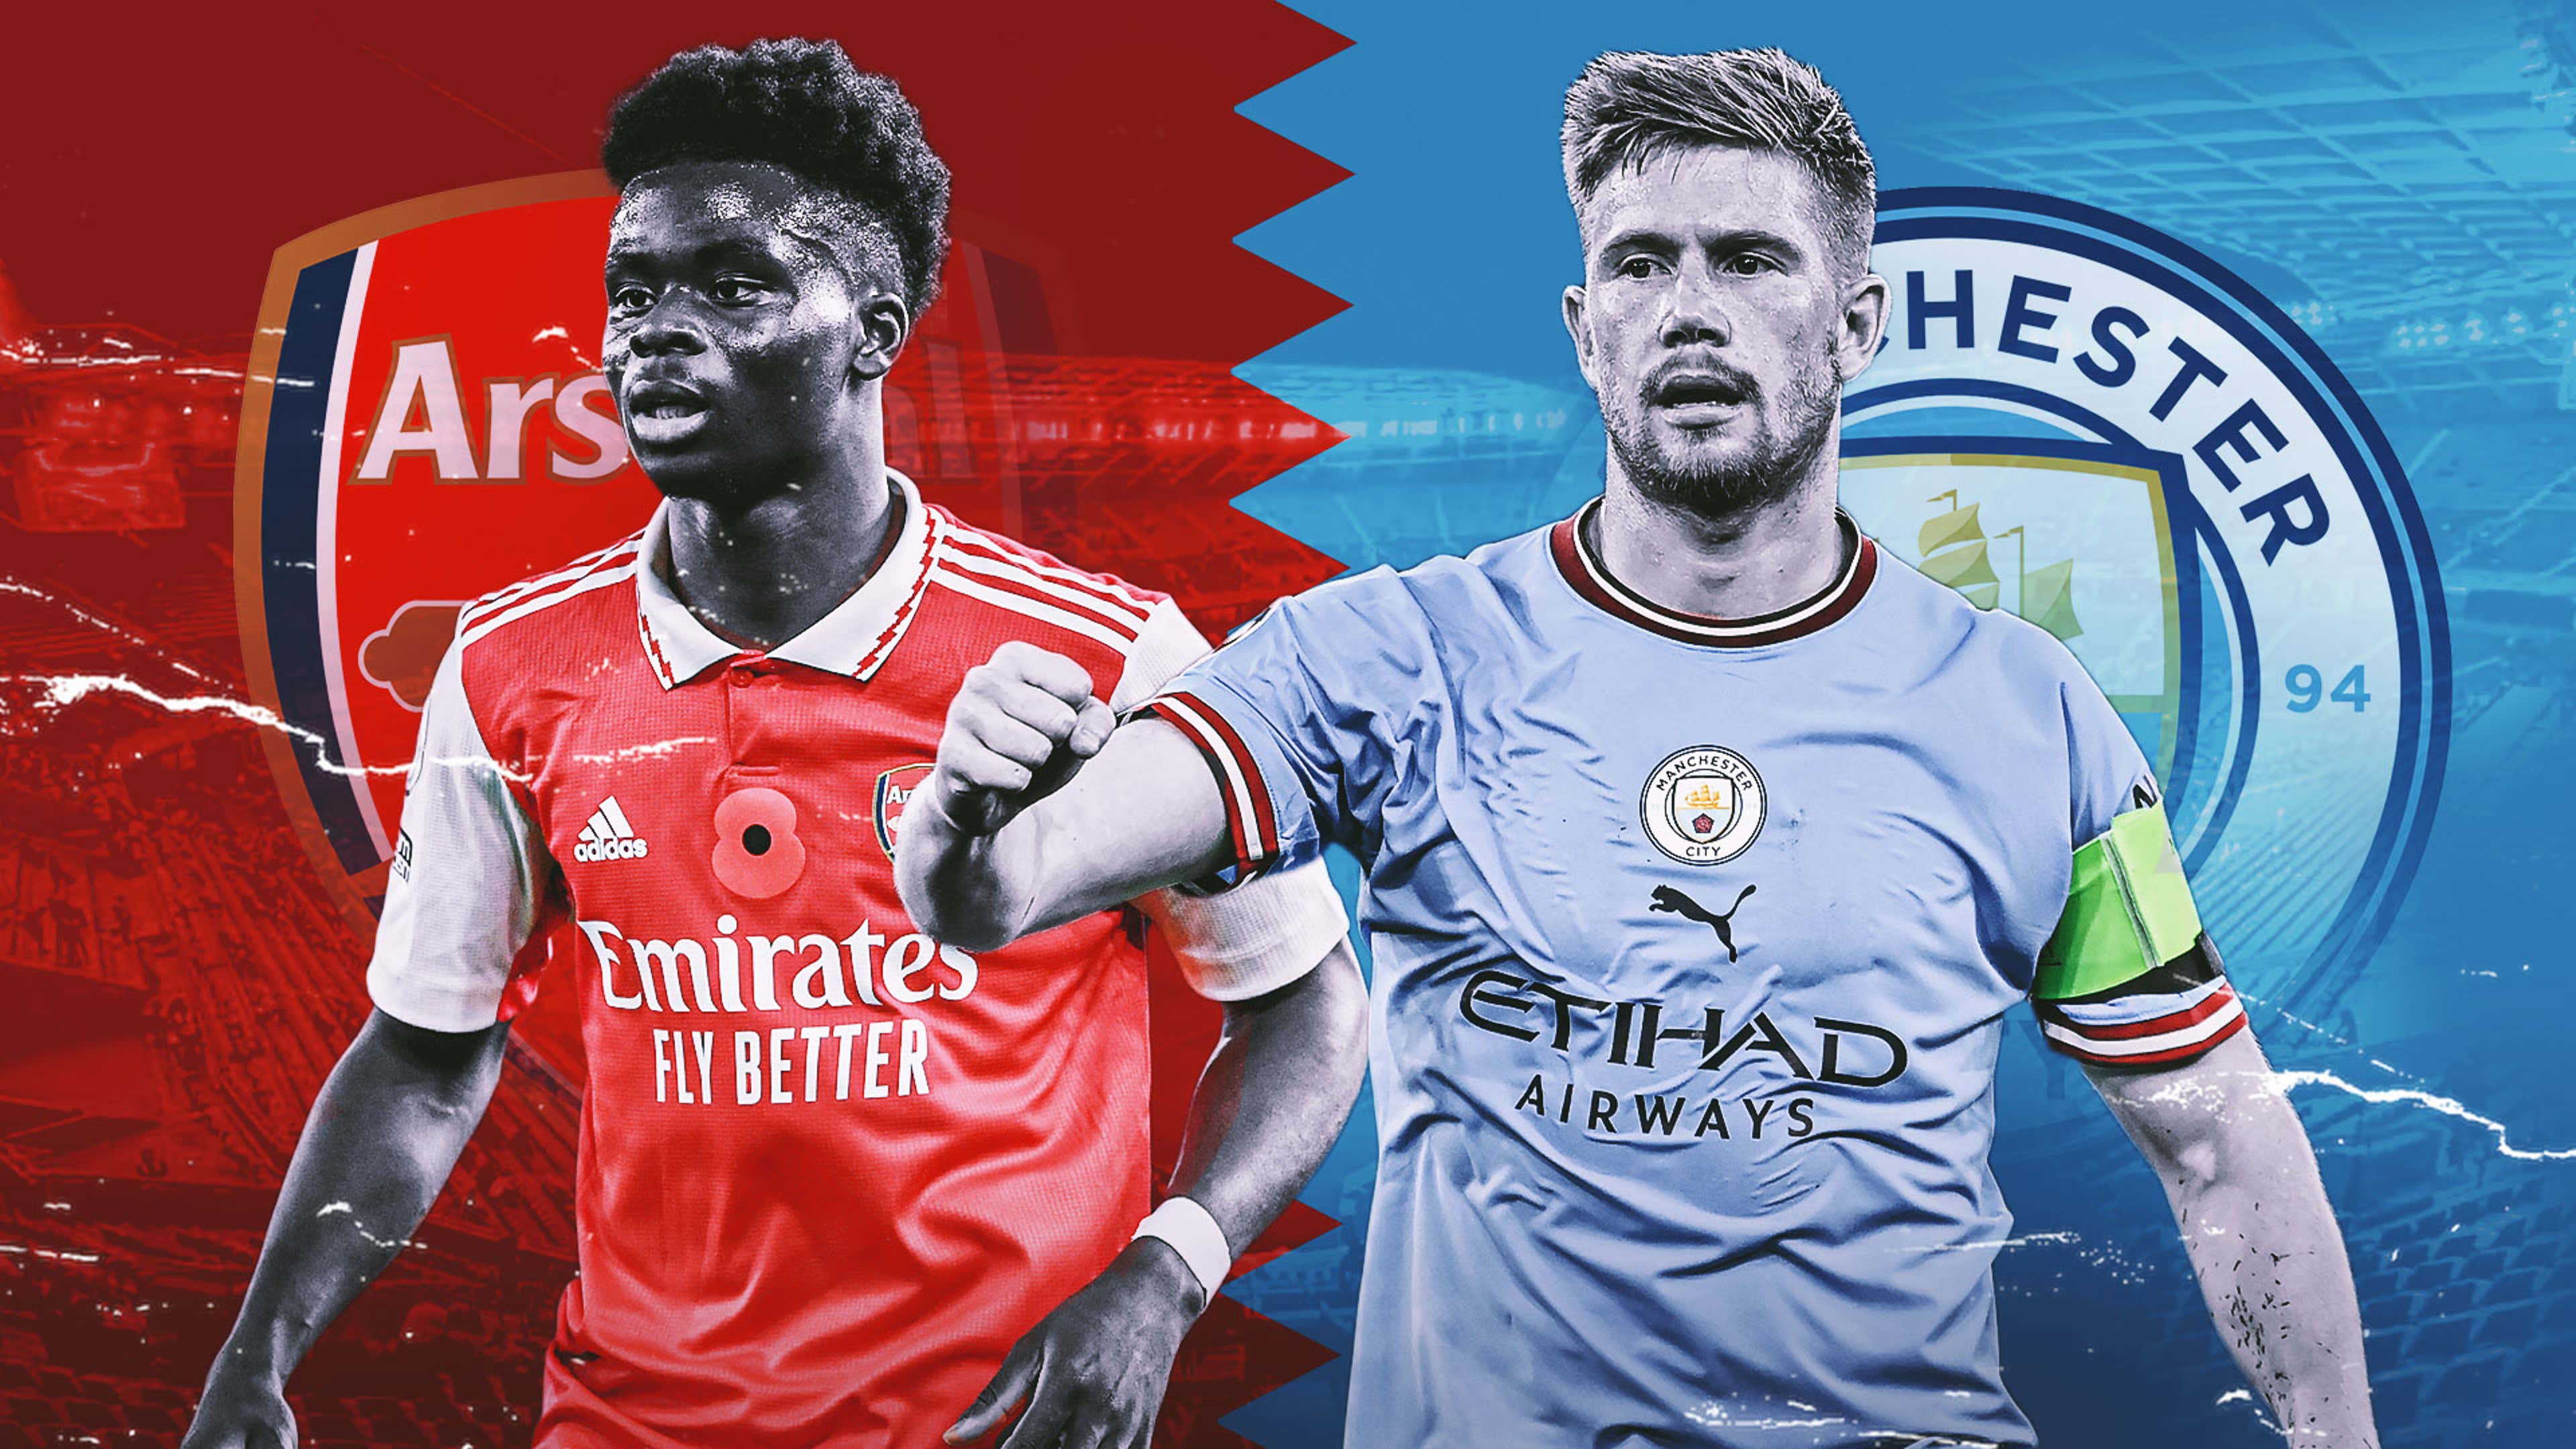 Arsenal vs Man City LIVE! Premier League result, match stream and